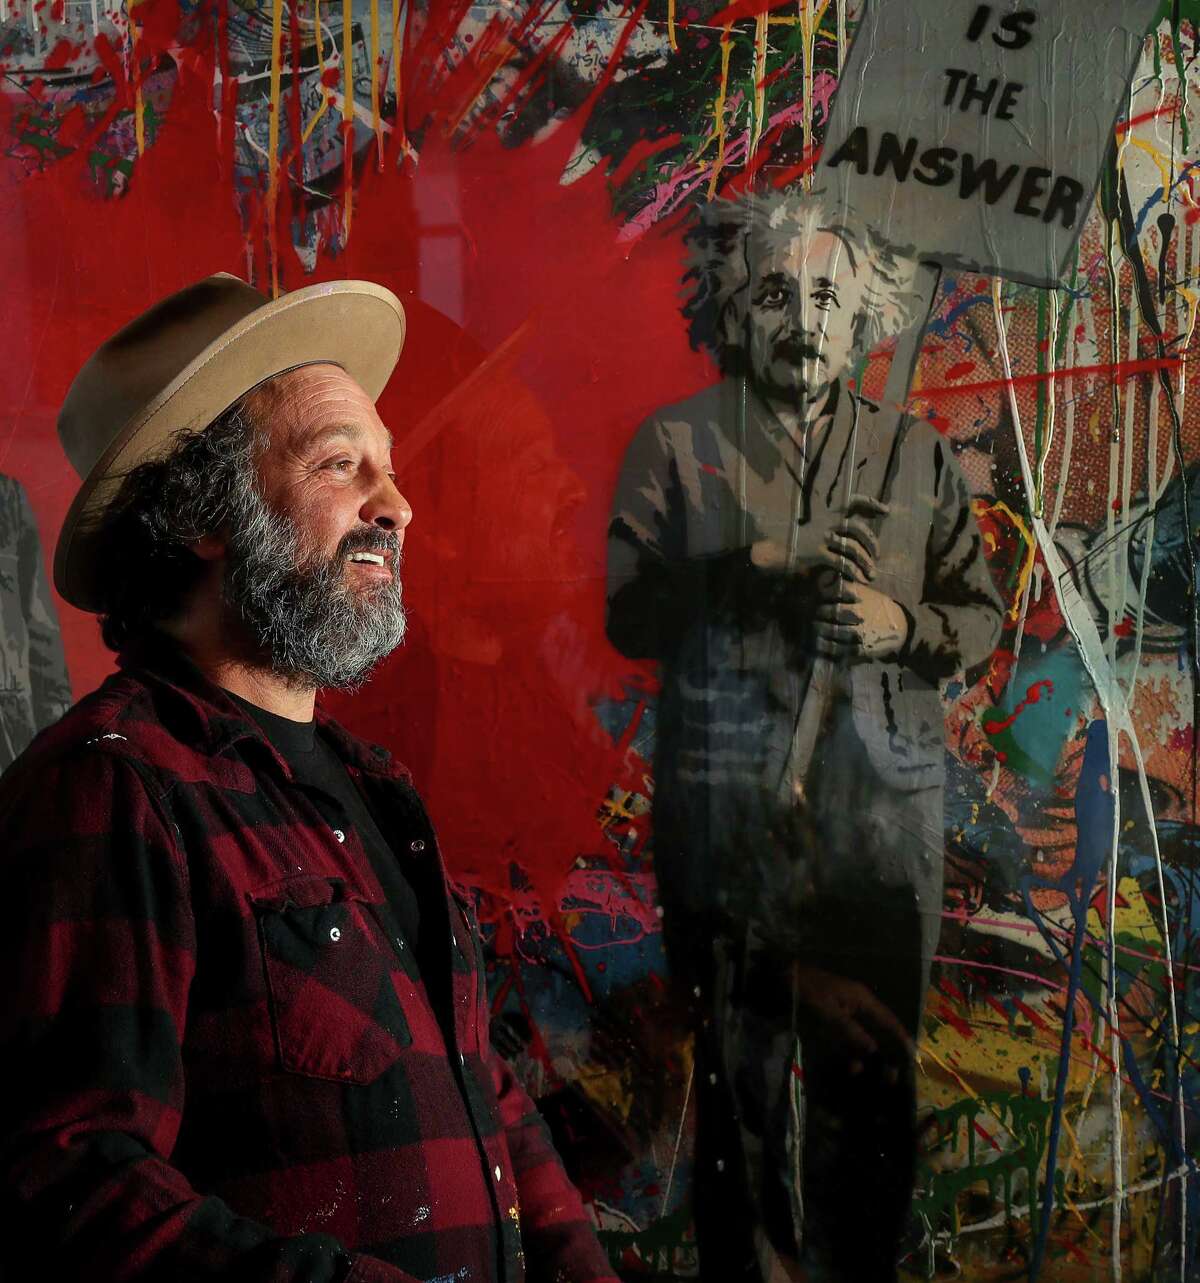 Mr. Brainwash playfully poses for a portrait at Art of the World Gallery, Wednesday, April 26, 2017, in Houston. ( Jon Shapley / Houston Chronicle )